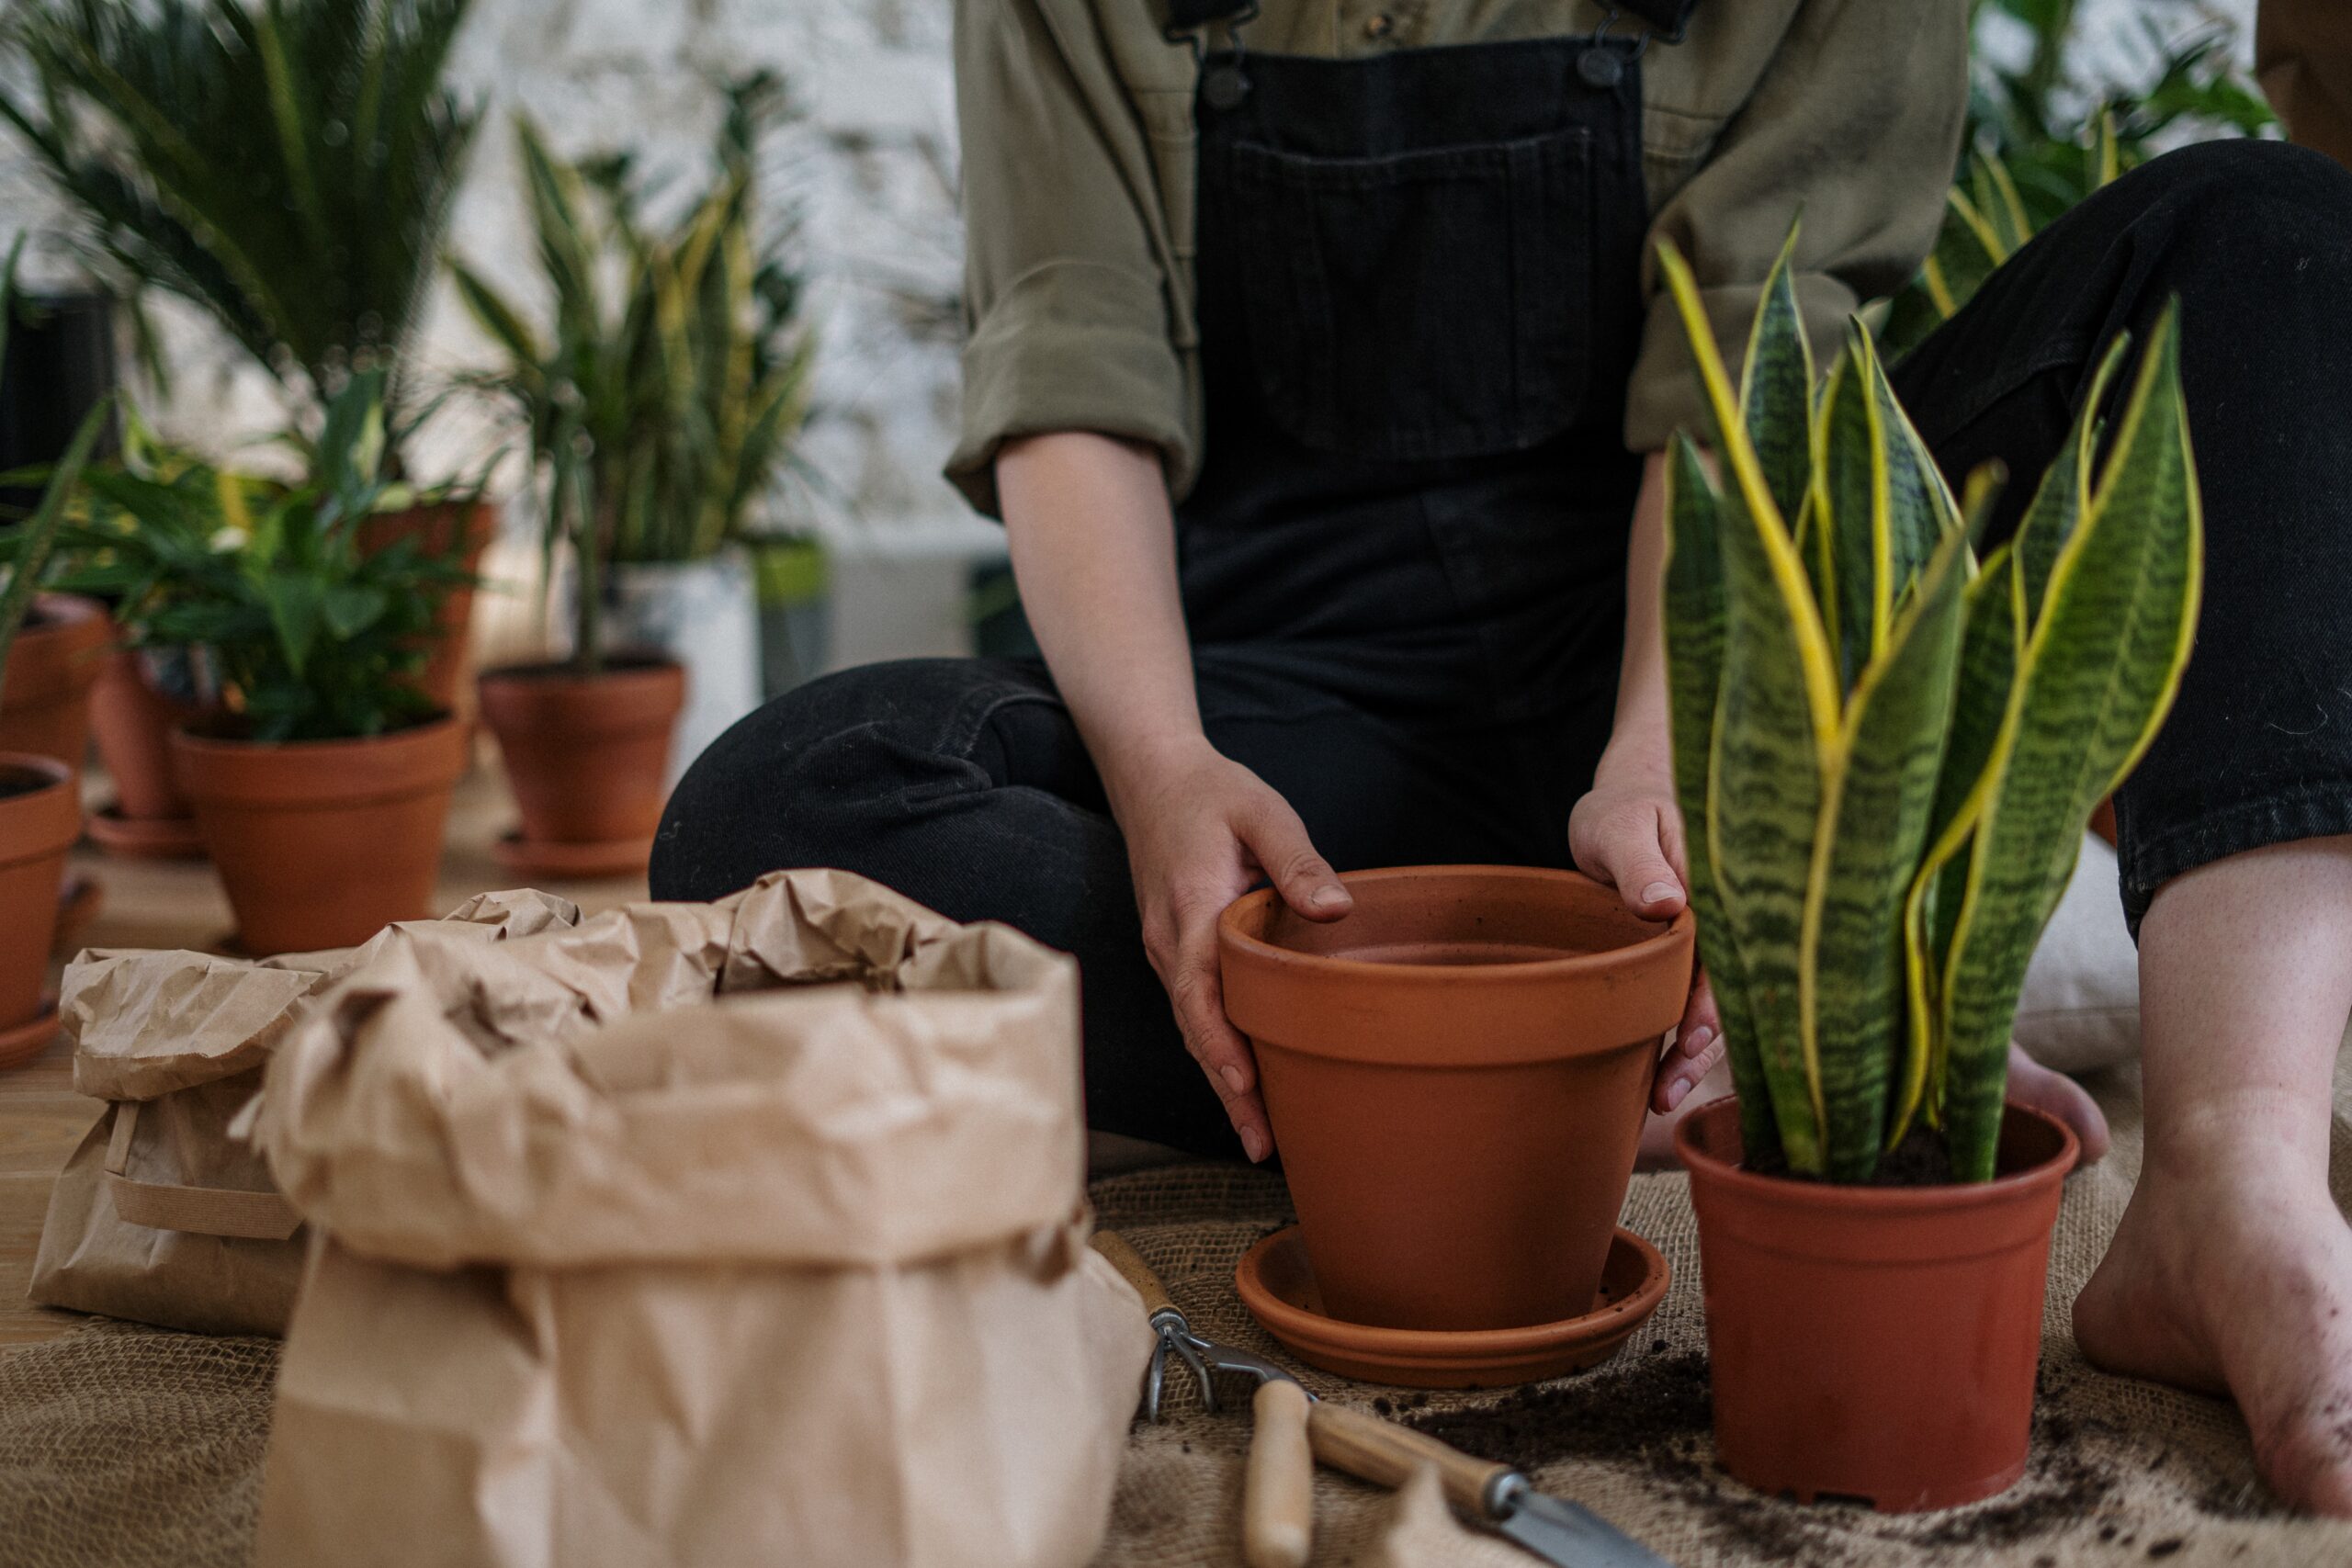 a person wearing black overalls and a grey top potting up plants; How to Turn Your Garden into a Green Oasis of Life